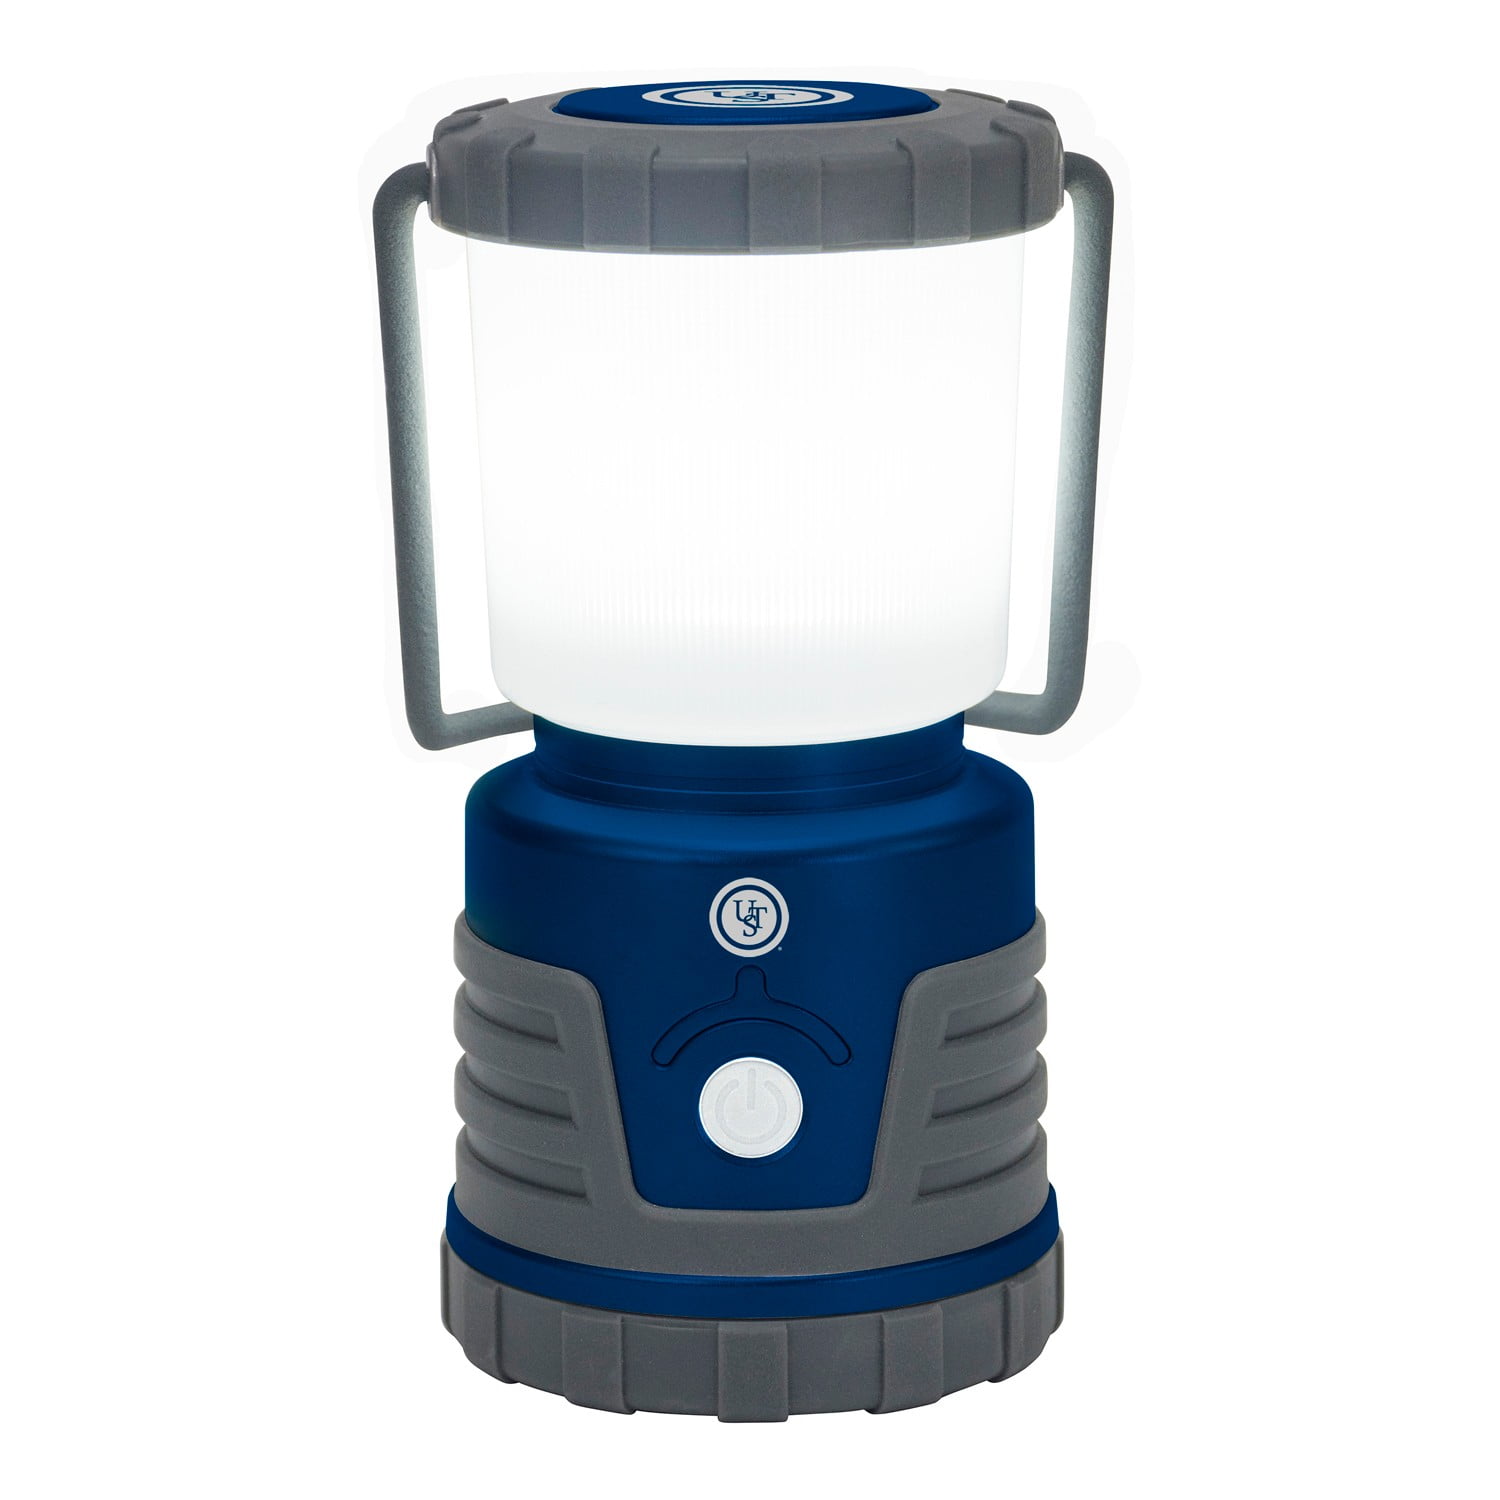 Hiking UST 30-Day Duro LED Portable 700 Lumen Lantern with Lifetime LED Bulbs and Hook for Camping Emergency and Outdoor Survival